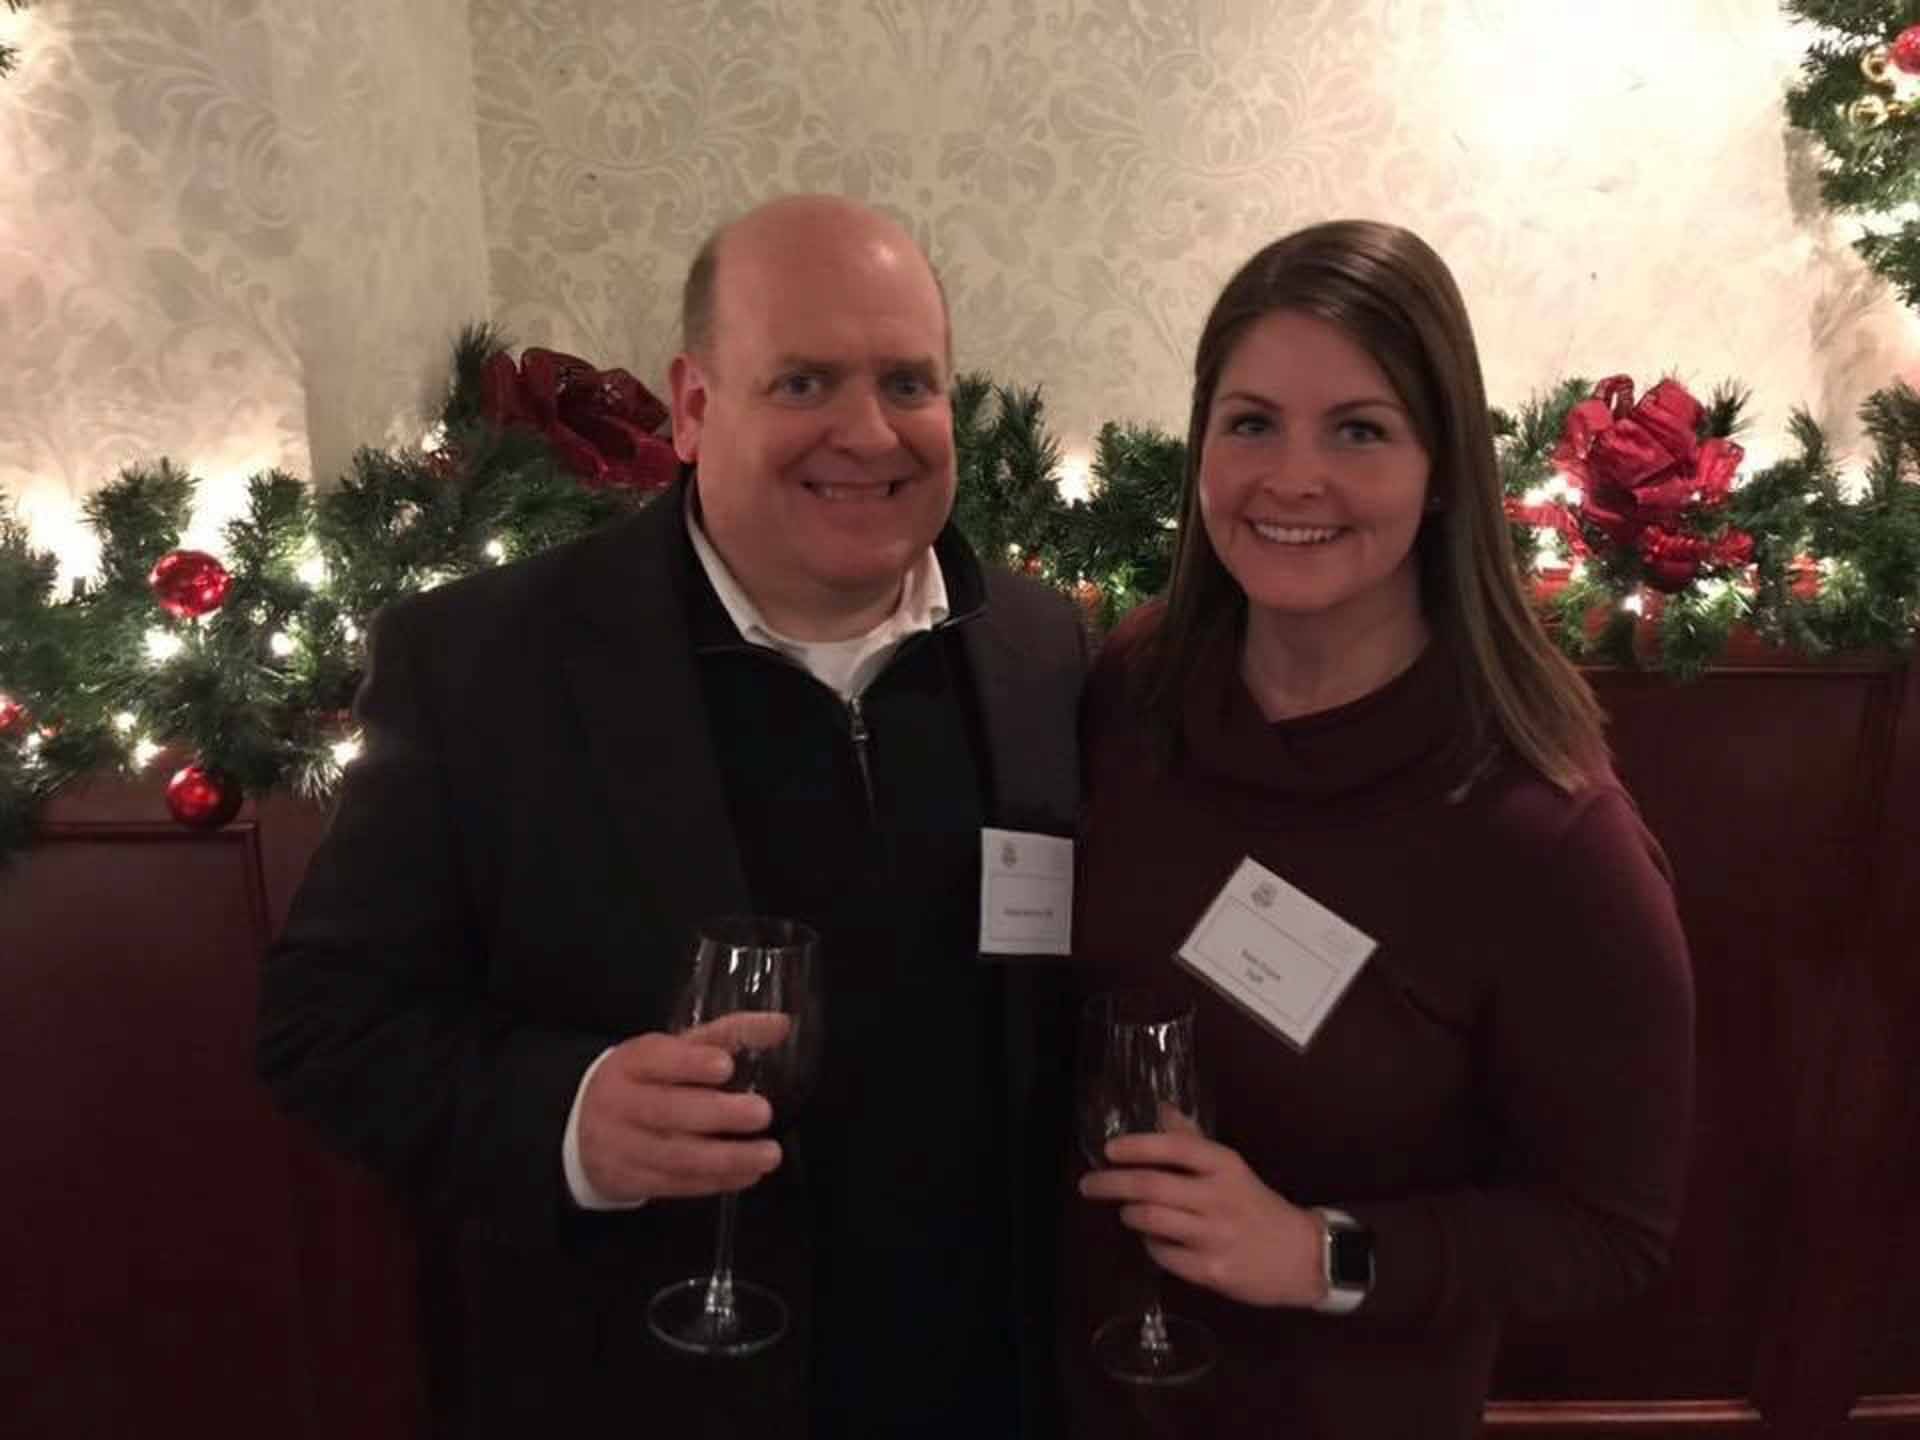 law-association-christmas-social-2019-two-people-smile-while-holding-drinks